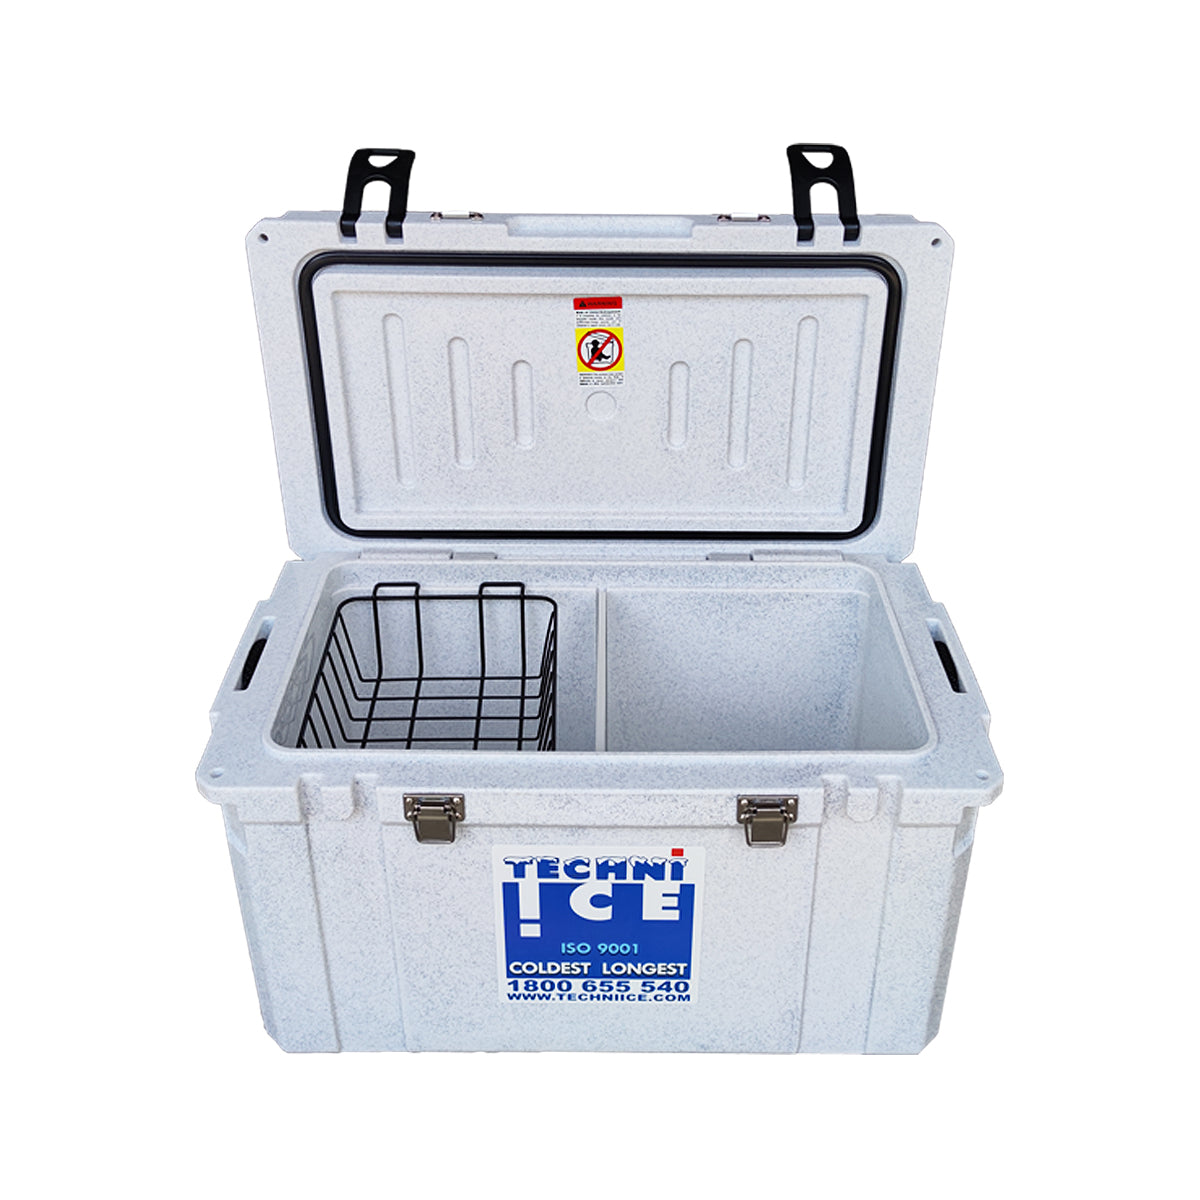 Classic Hardcore Ice Box 75L White *FRESH STOCKS OF BLUE JUST ARRIVED *PREORDER WHITE FOR JULY DISPATCH *FREE 12 REUSABLE DRY ICE PACKS VALUES $59.95